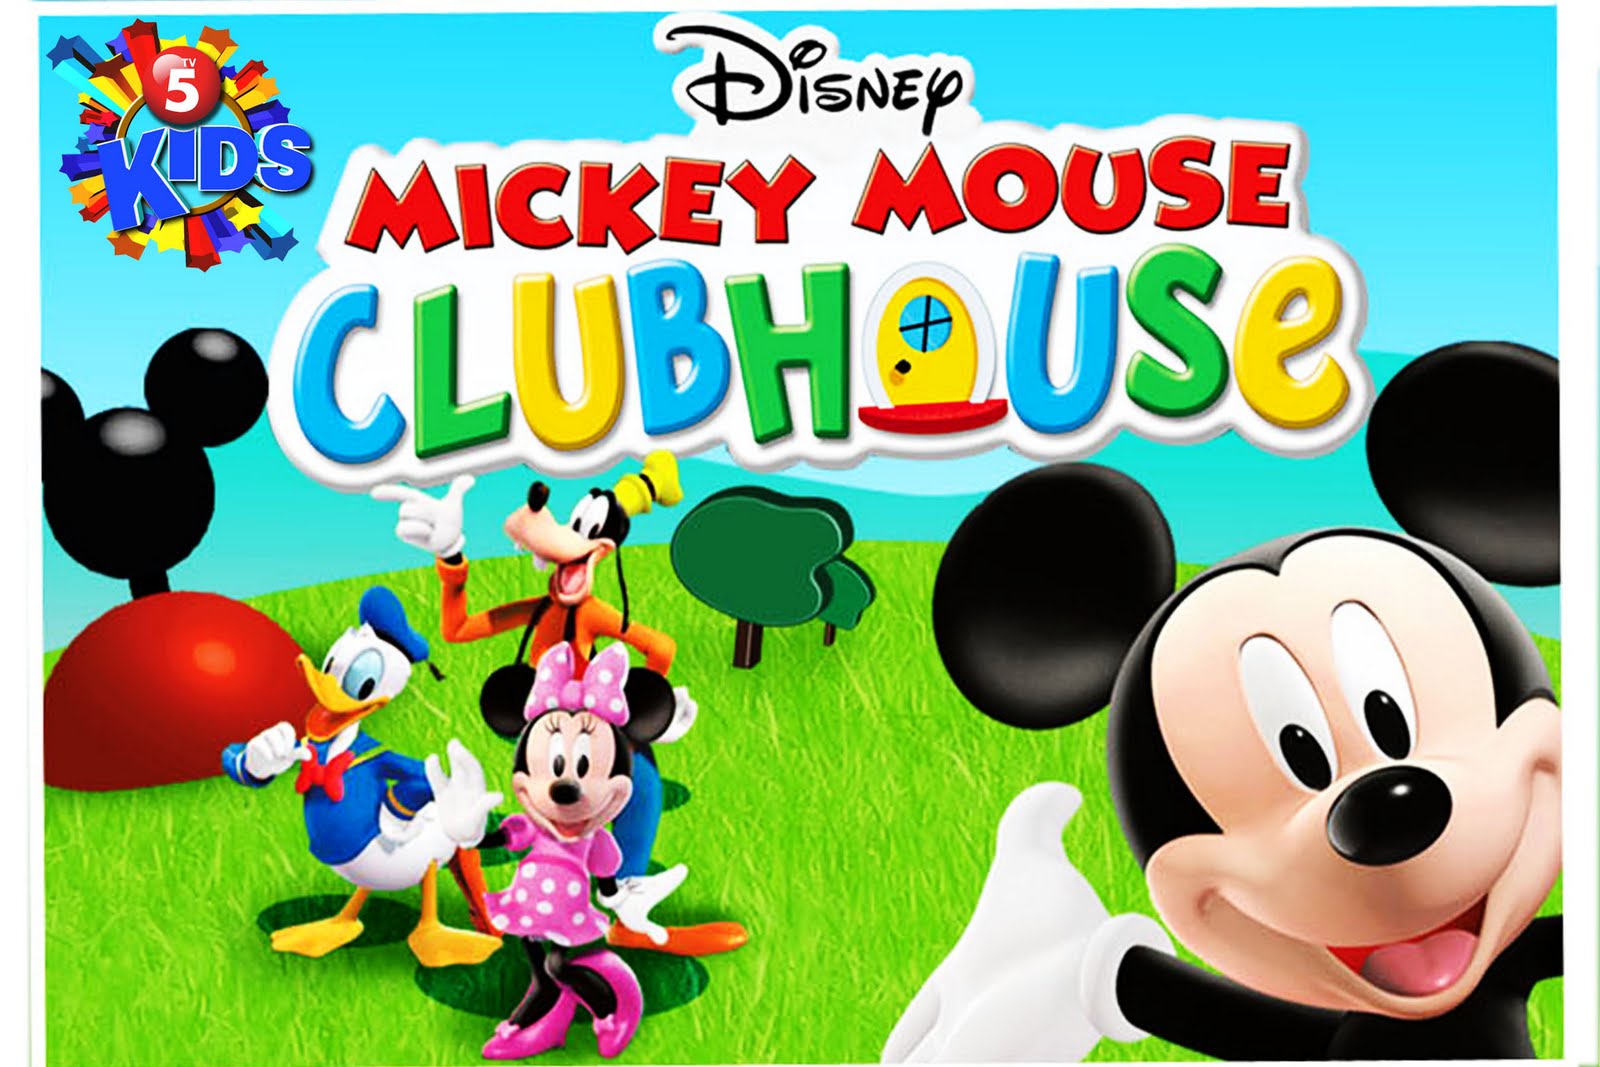 Mickey-Mouse-Clubhouse.jpg